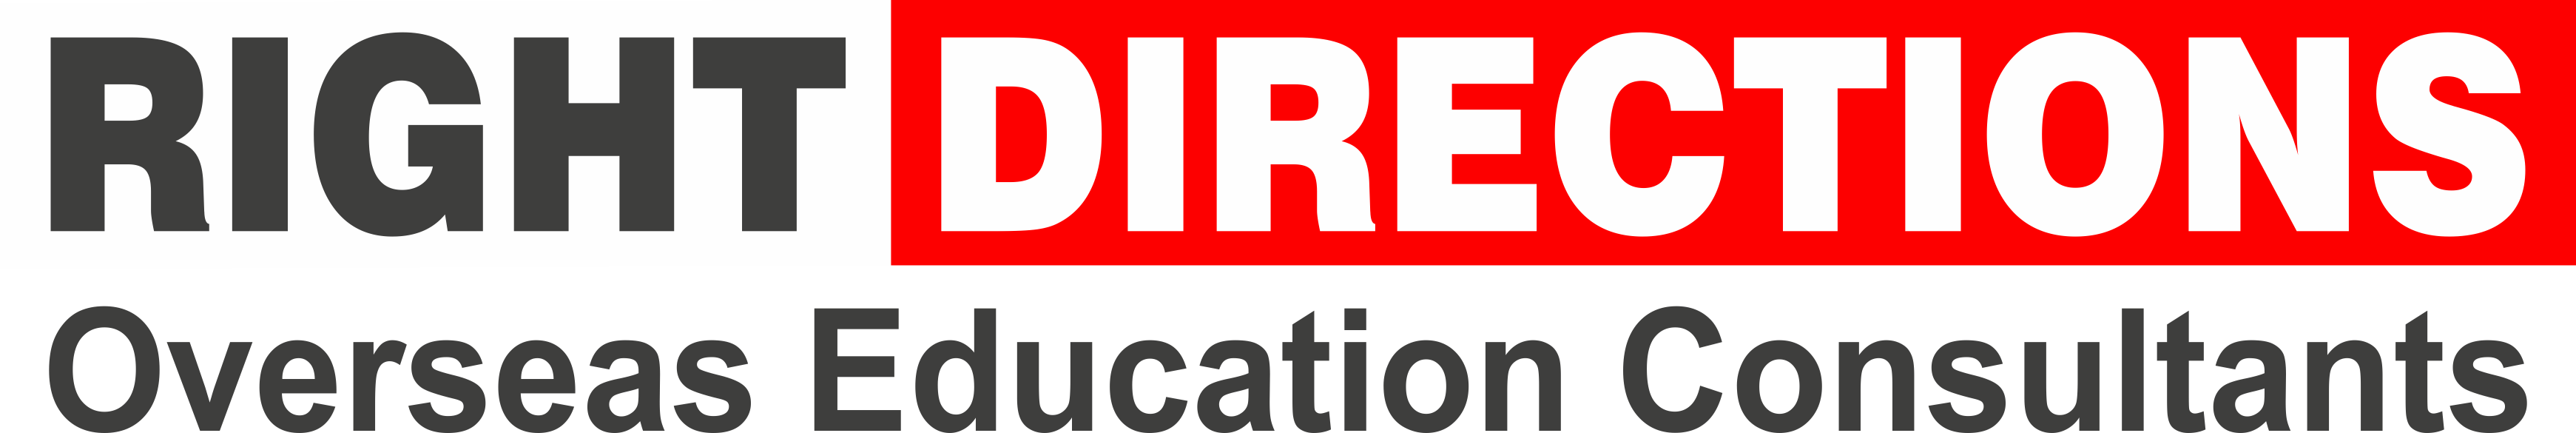 Right Directions Overseas|Schools|Education